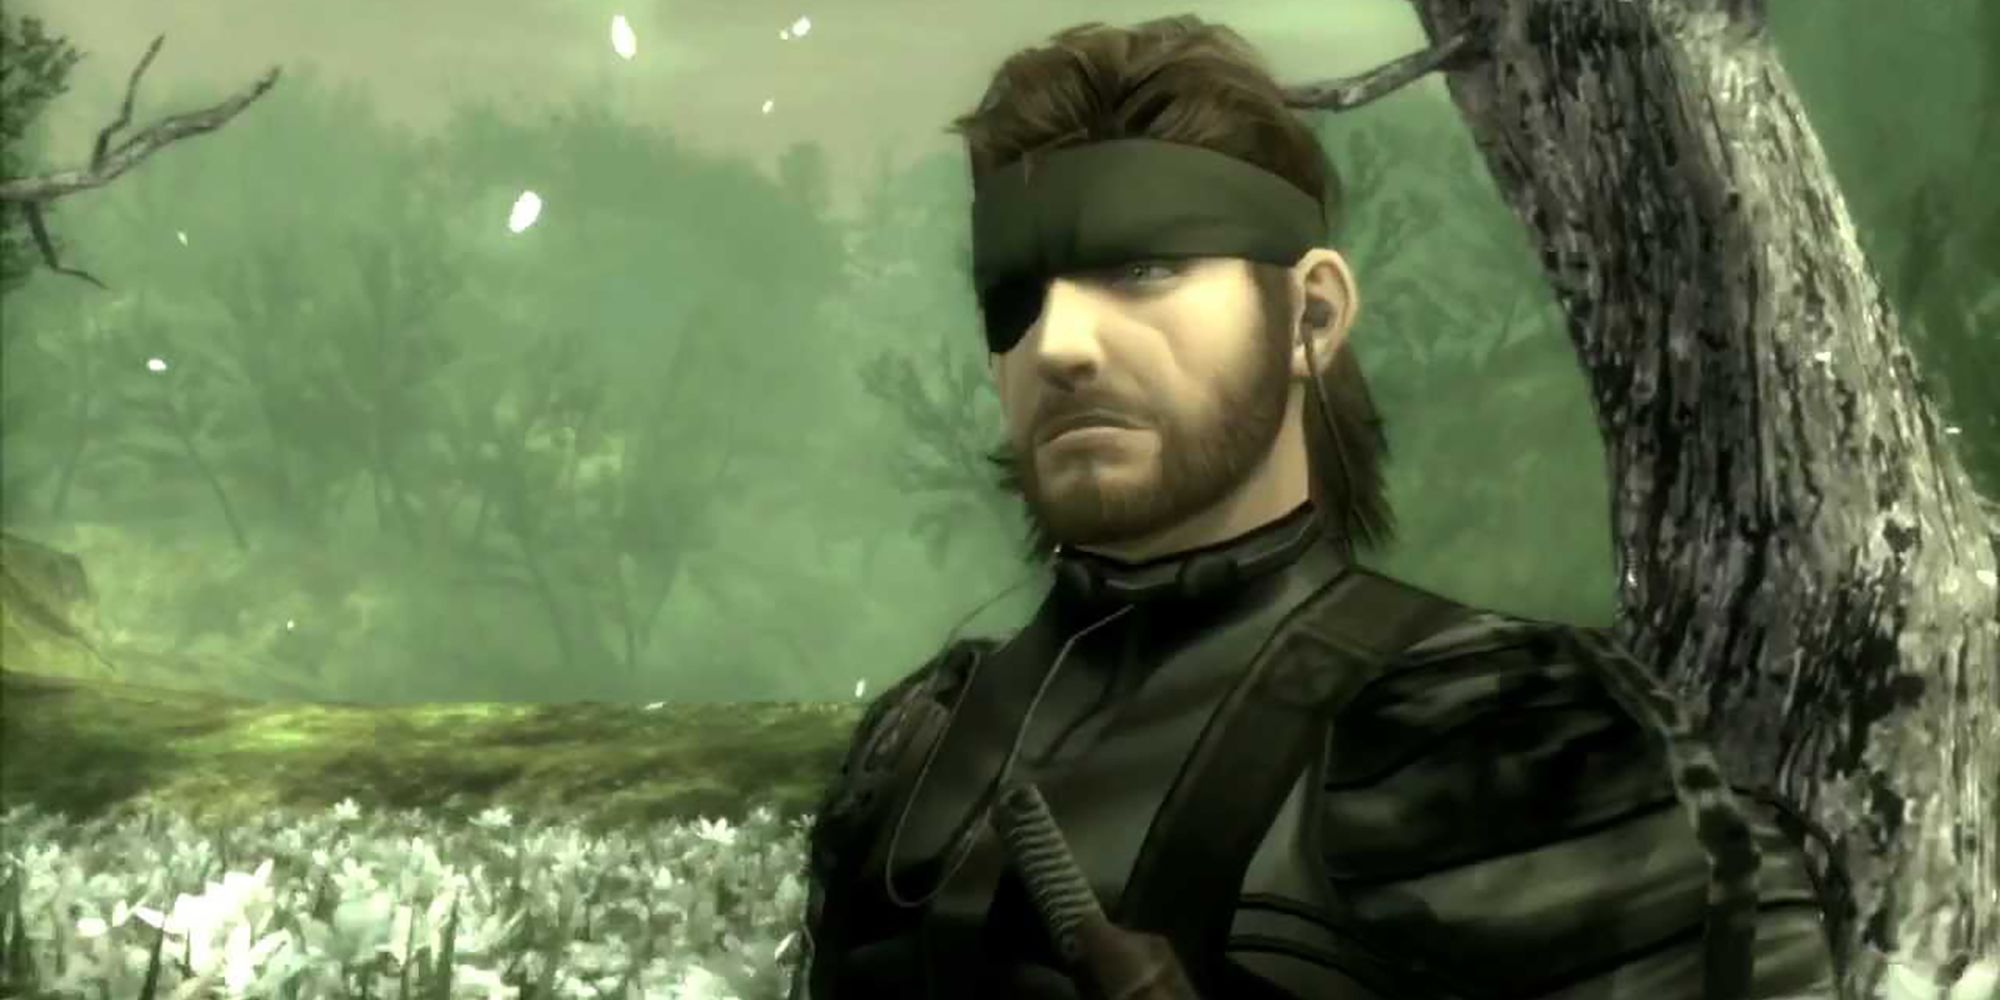 An Image From Metal Gear Solid